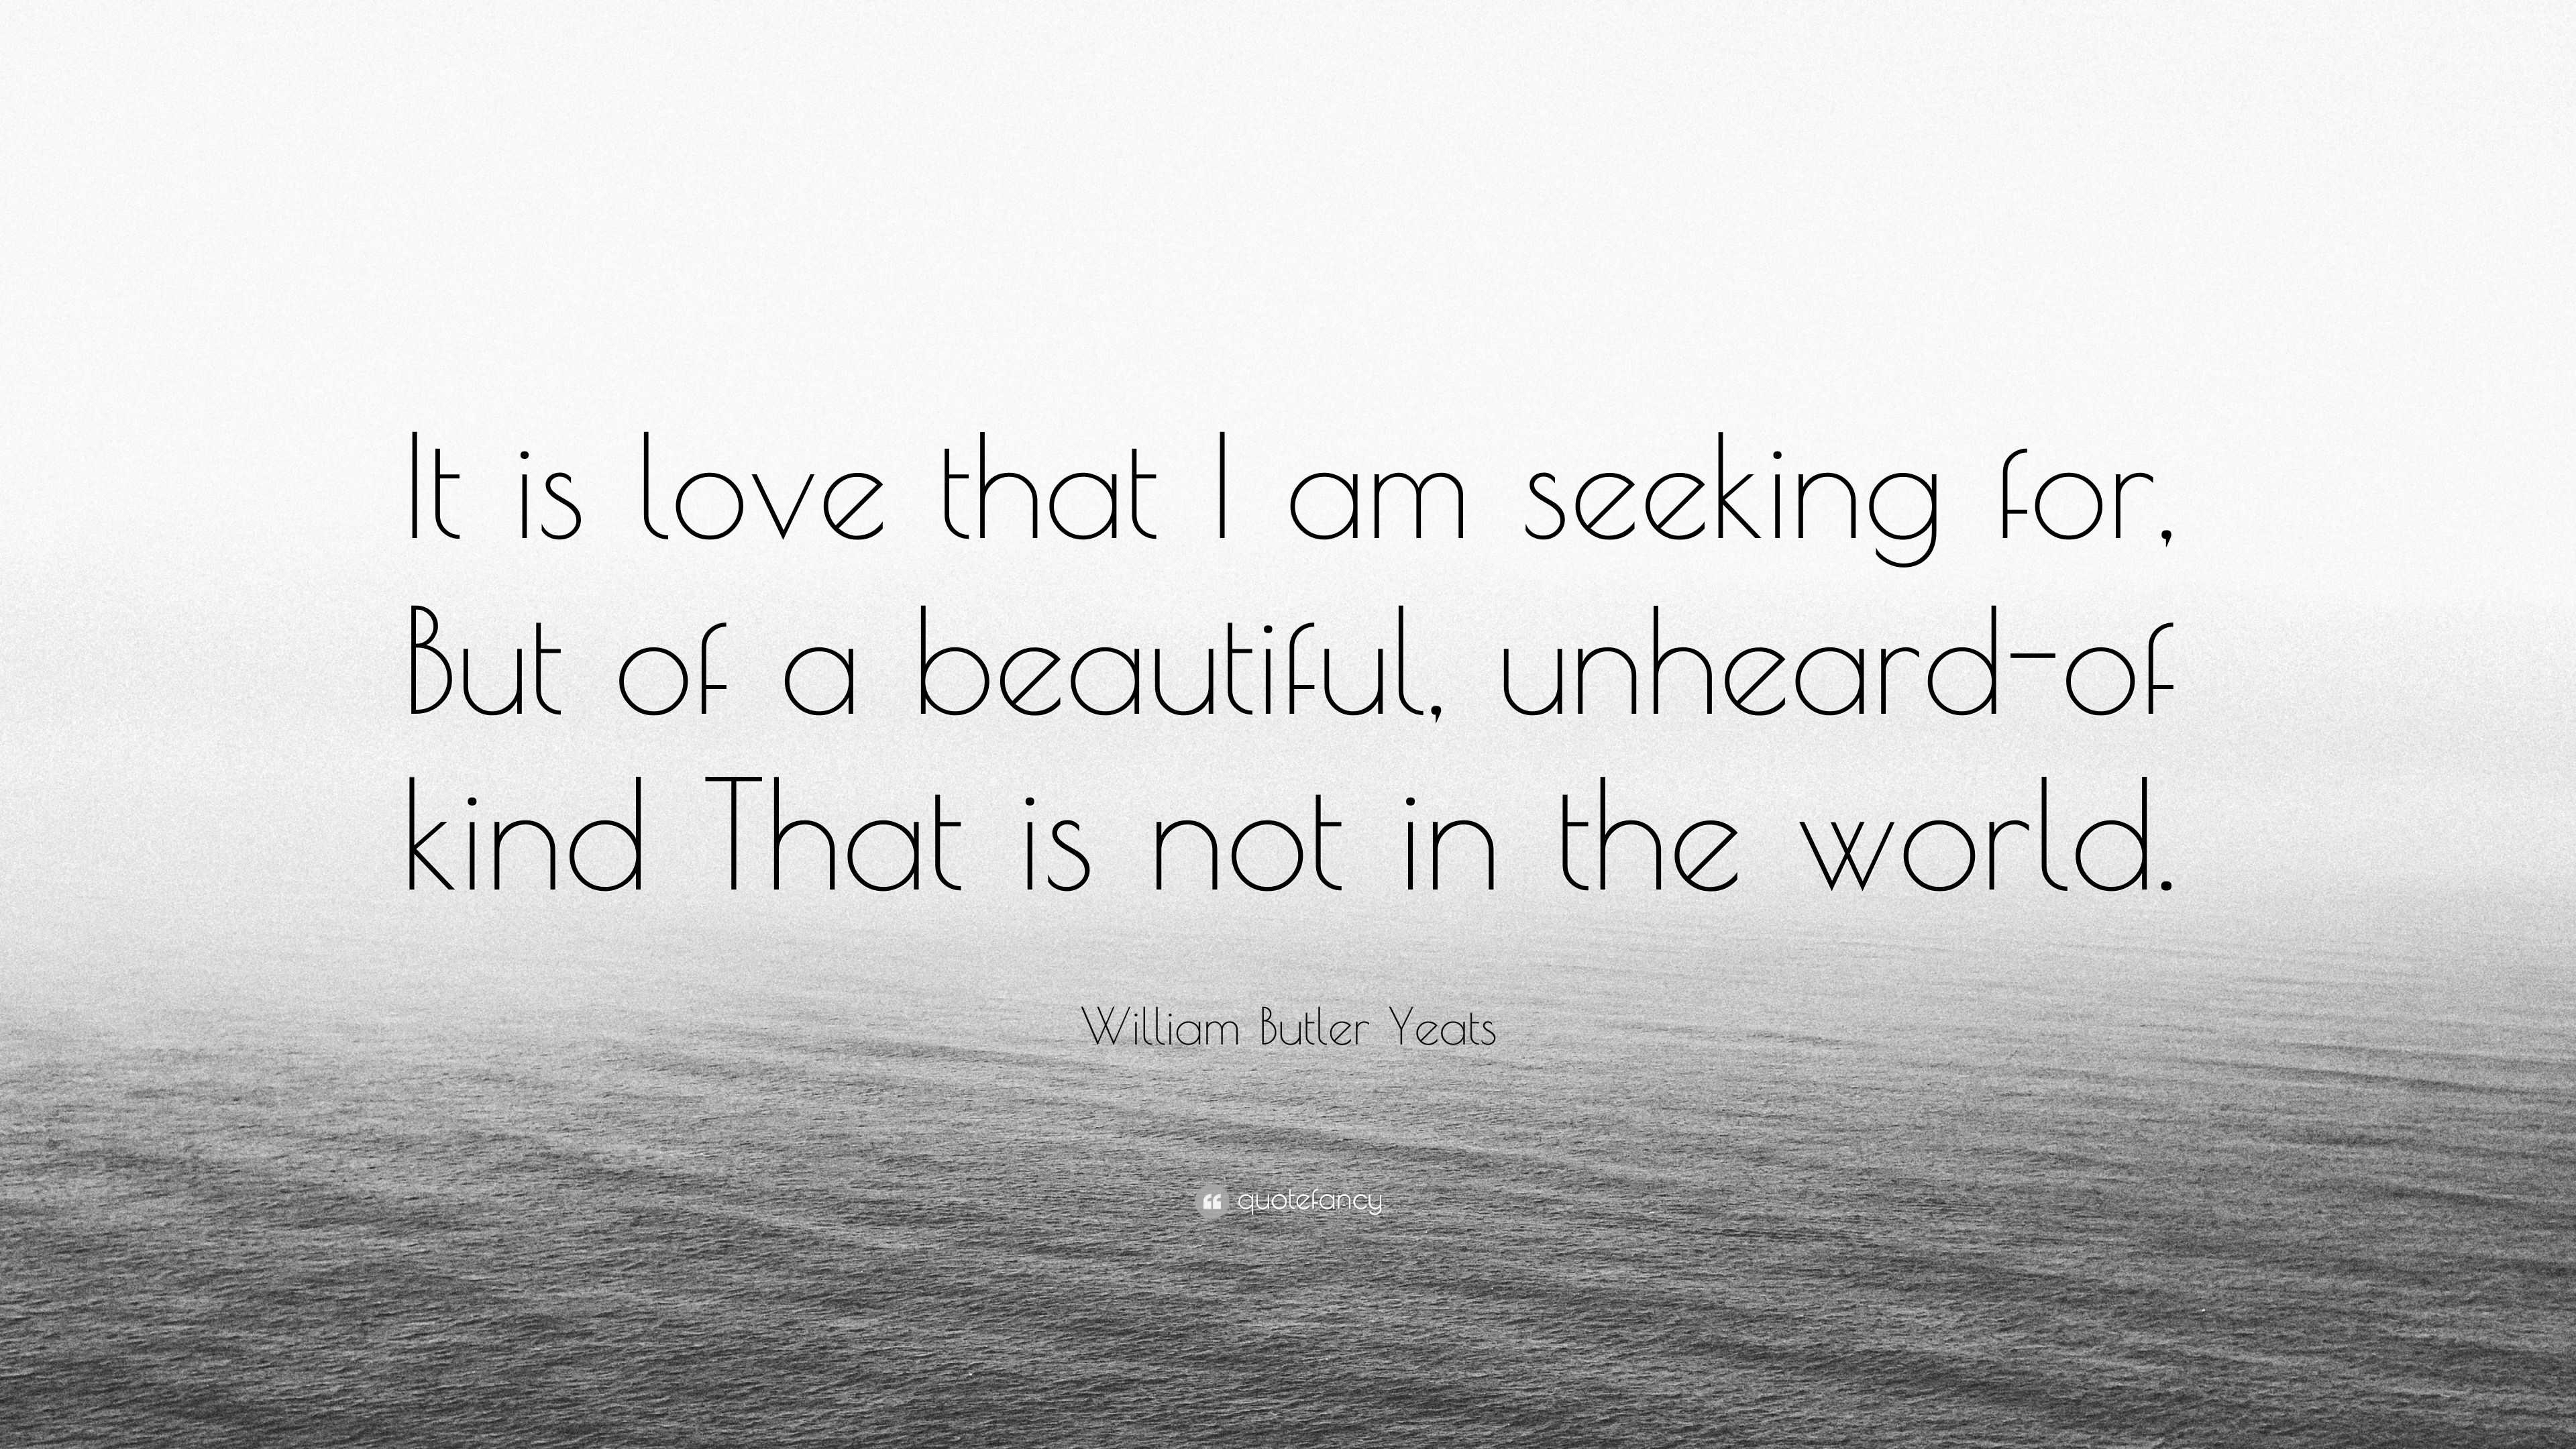 William Butler Yeats Quote: “It Is Love That I Am Seeking For, But Of A Beautiful,